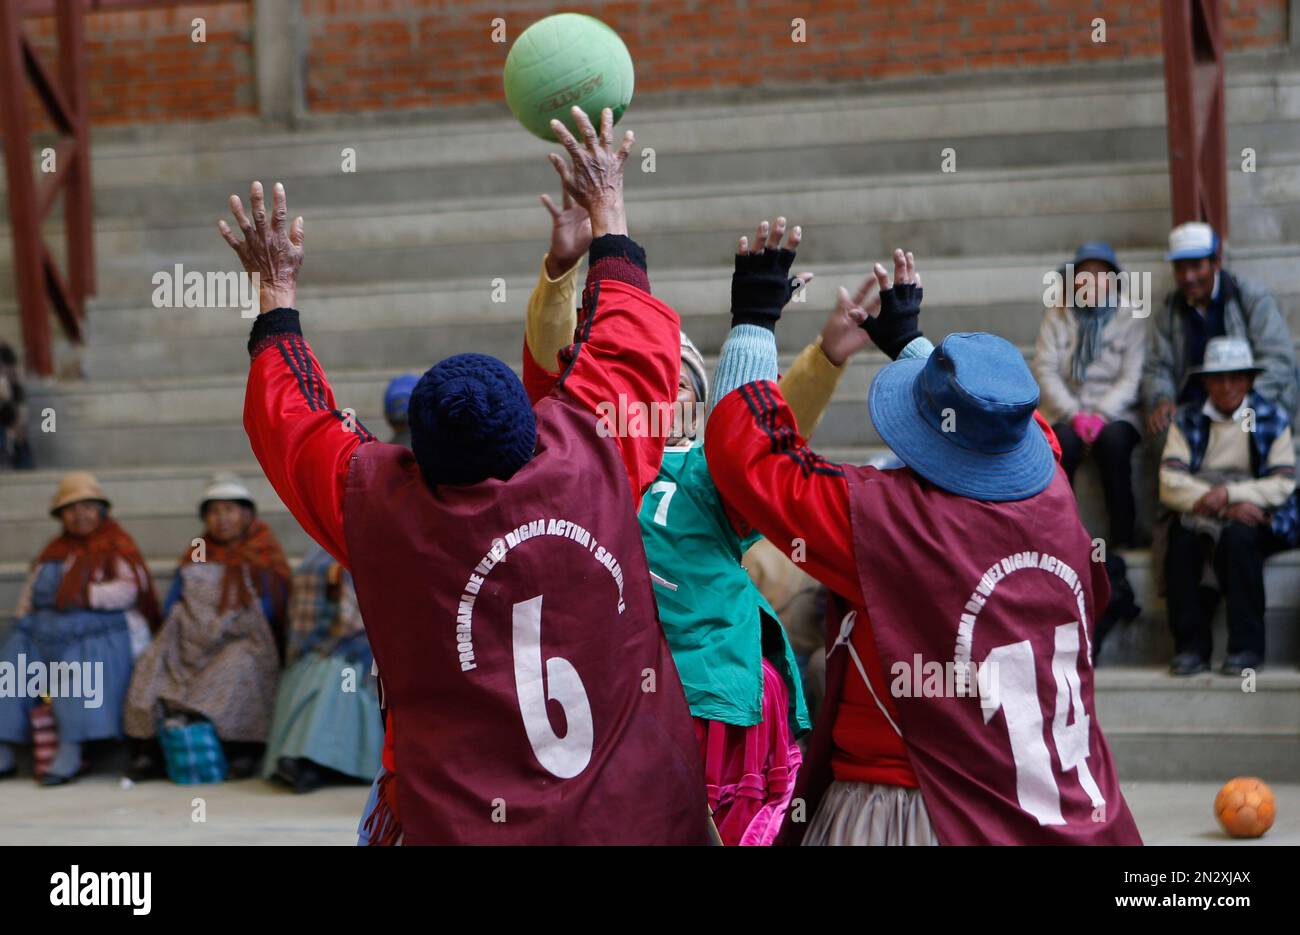 https://c8.alamy.com/comp/2N2XJAX/in-this-feb-11-2105-photo-elderly-aymara-indigenous-women-play-handball-in-el-alto-bolivia-team-handball-is-an-olympic-sport-in-which-two-teams-of-pass-a-ball-using-their-hands-with-the-aim-of-throwing-it-into-the-others-goal-ap-photojuan-karita-2N2XJAX.jpg